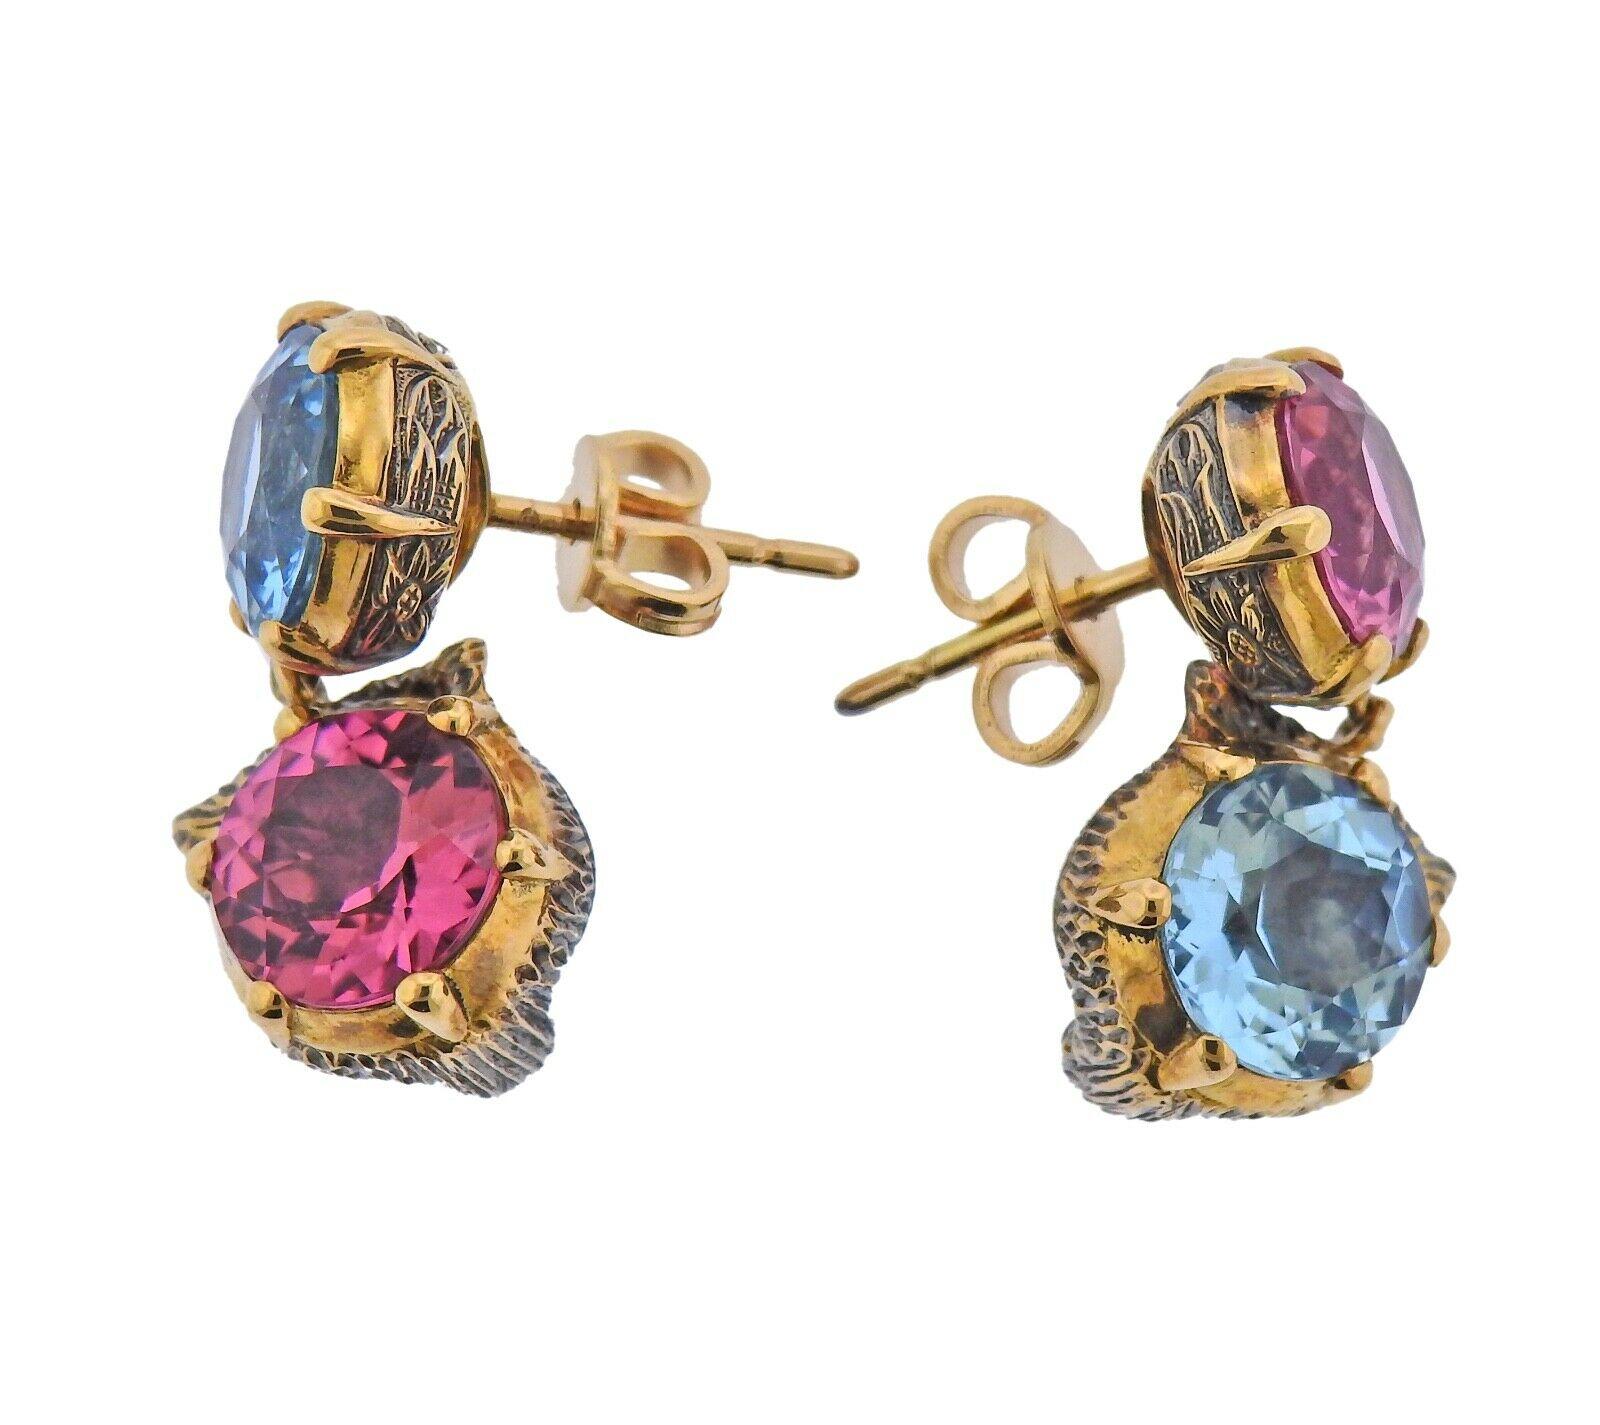 New Le Marches Des Marseilles 18k gold pair of earrings by Gucci, with pink quartz, blue topaz and diamond eyes. Retail $5980. with box and papers.  Earrings are 25mm long. Weight - Gucci, Au 750. Weight - 10.3 grams. 